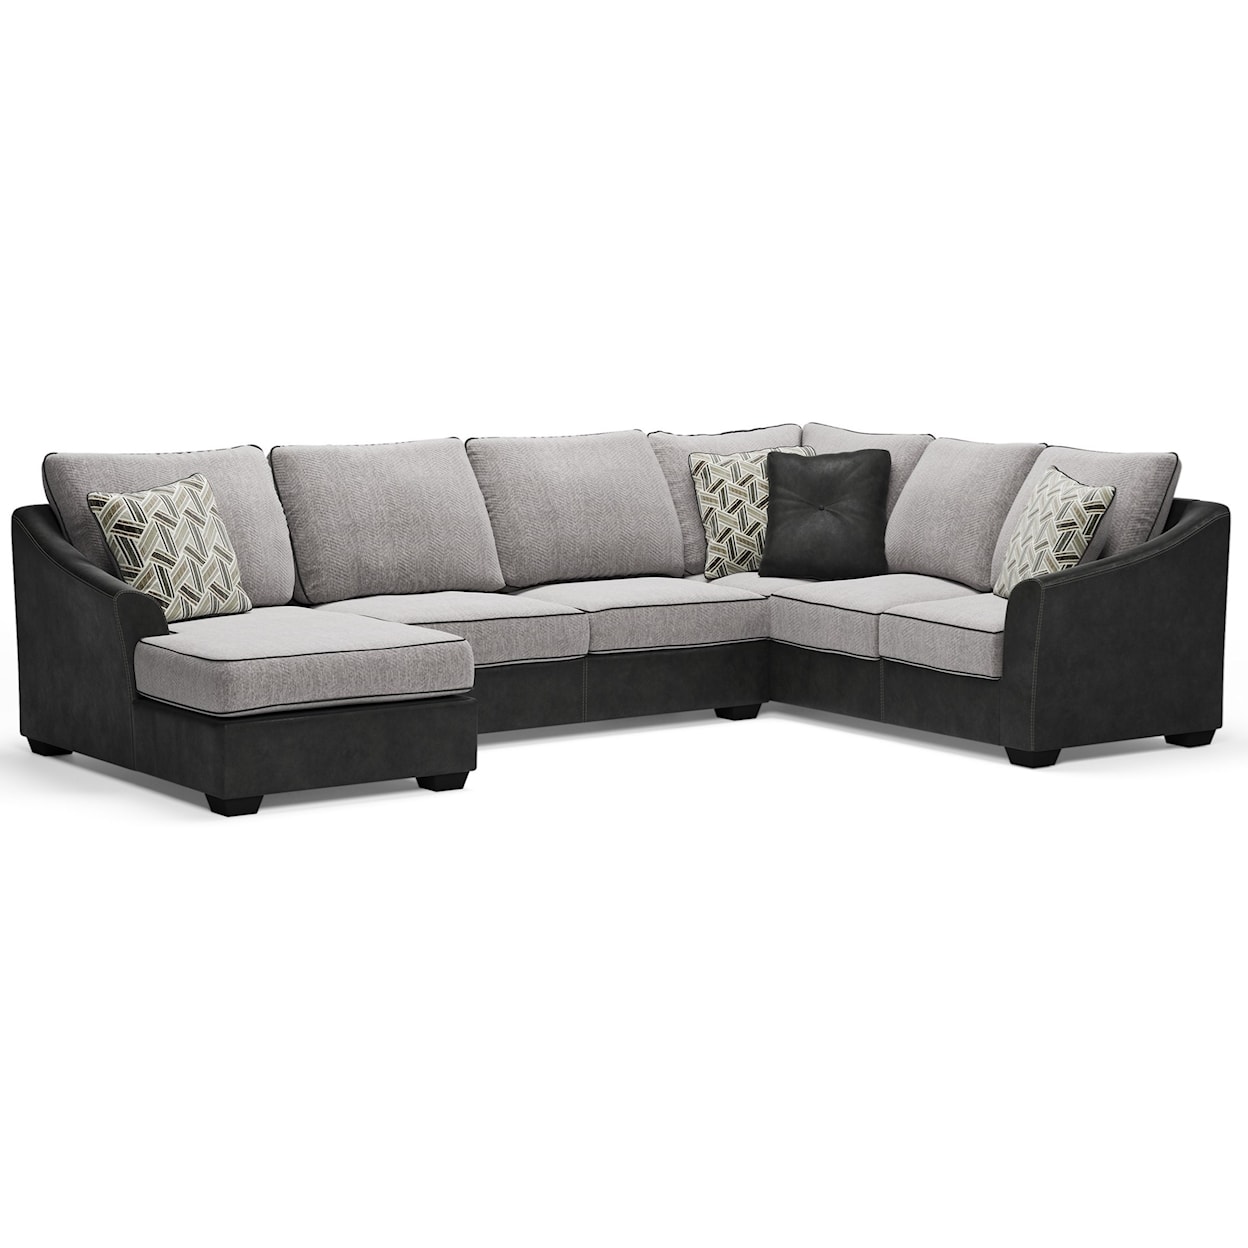 Ashley Signature Design Bilgray Sectional with Left Chaise